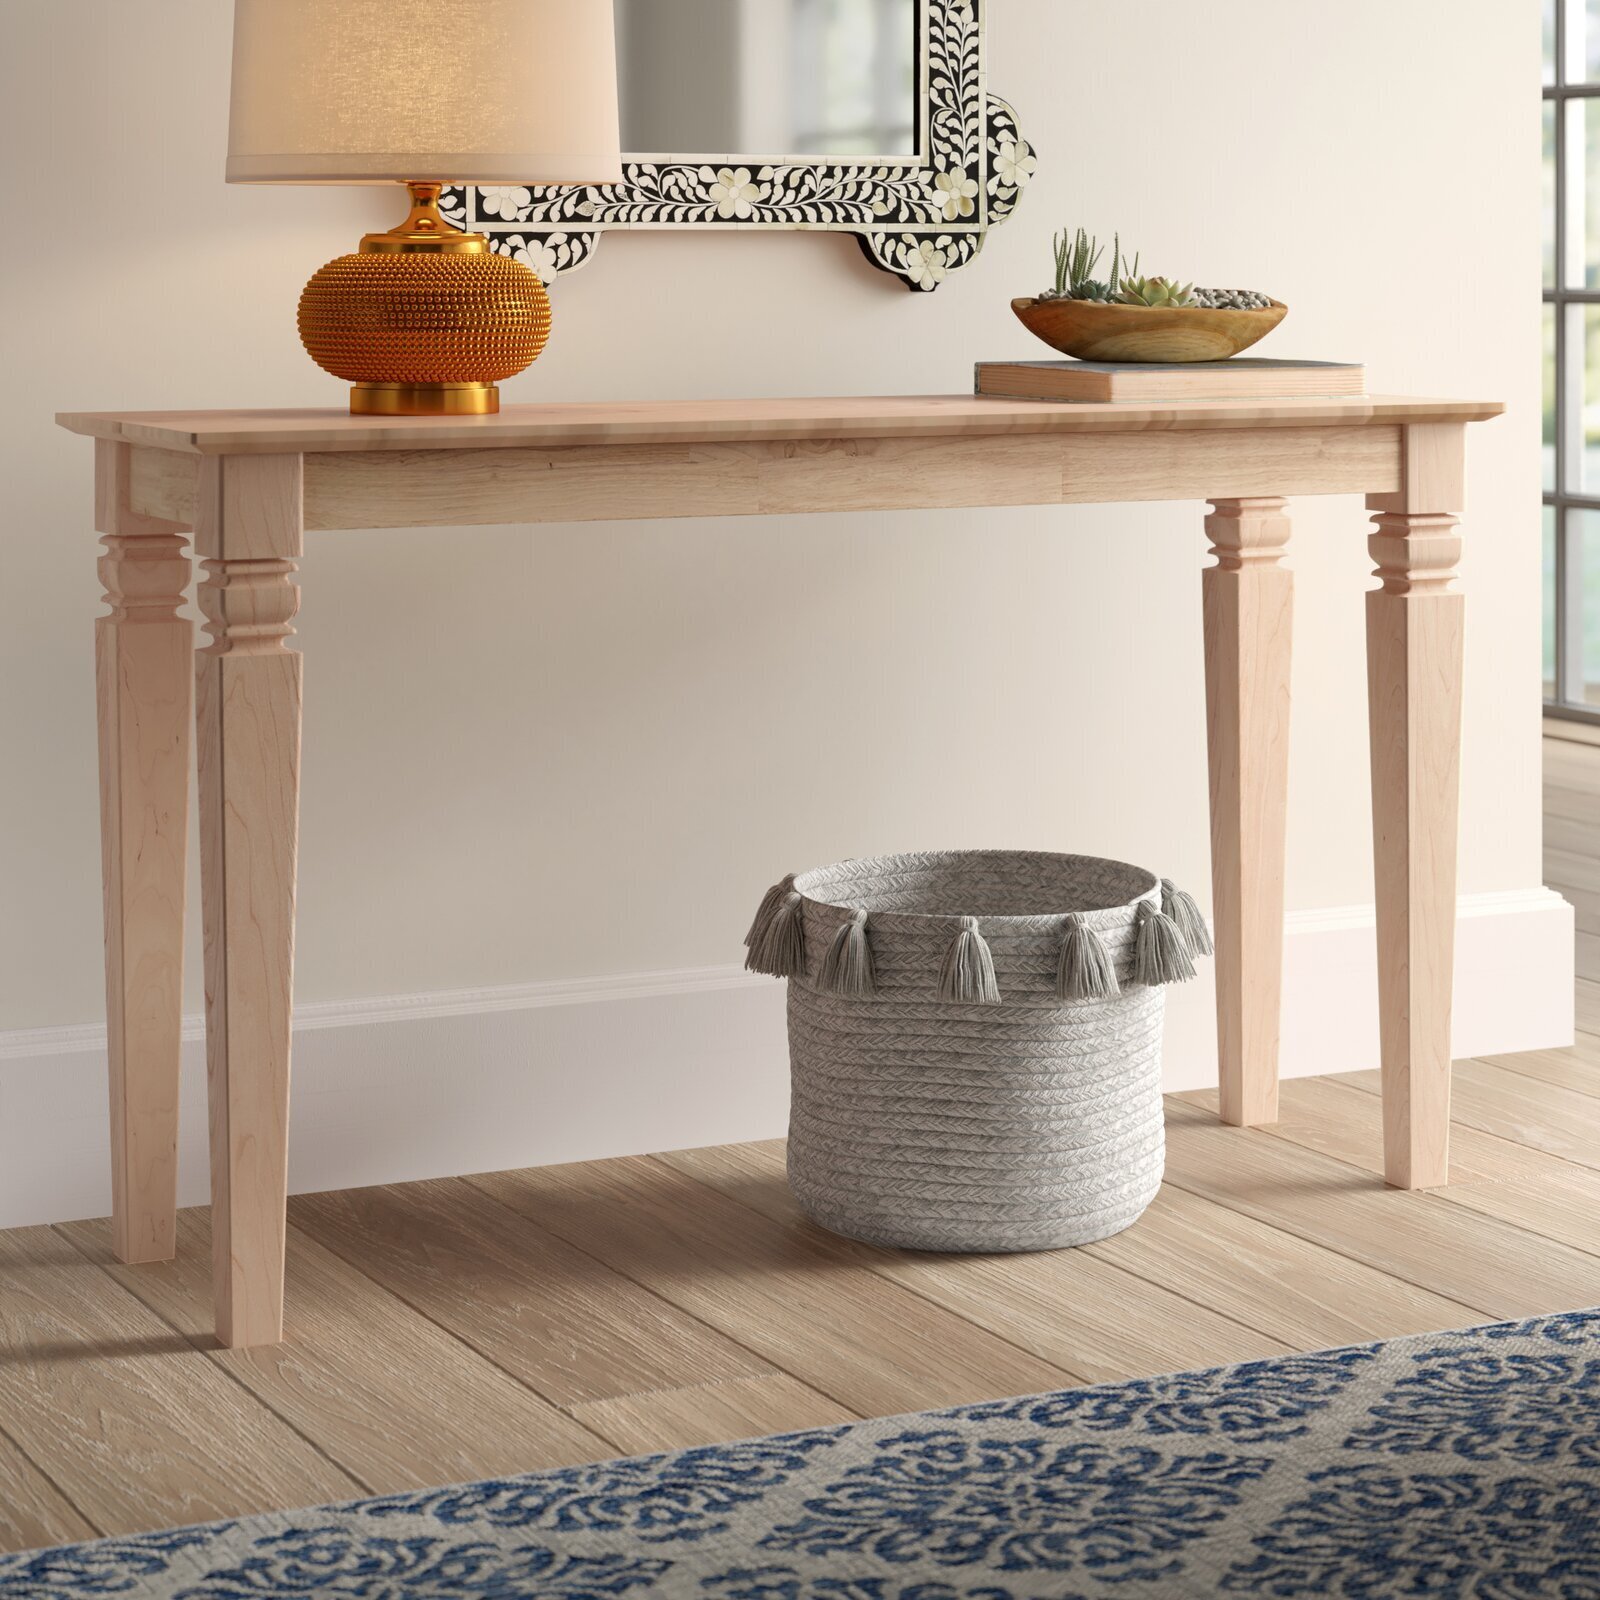 Milled Details Wood Console Table